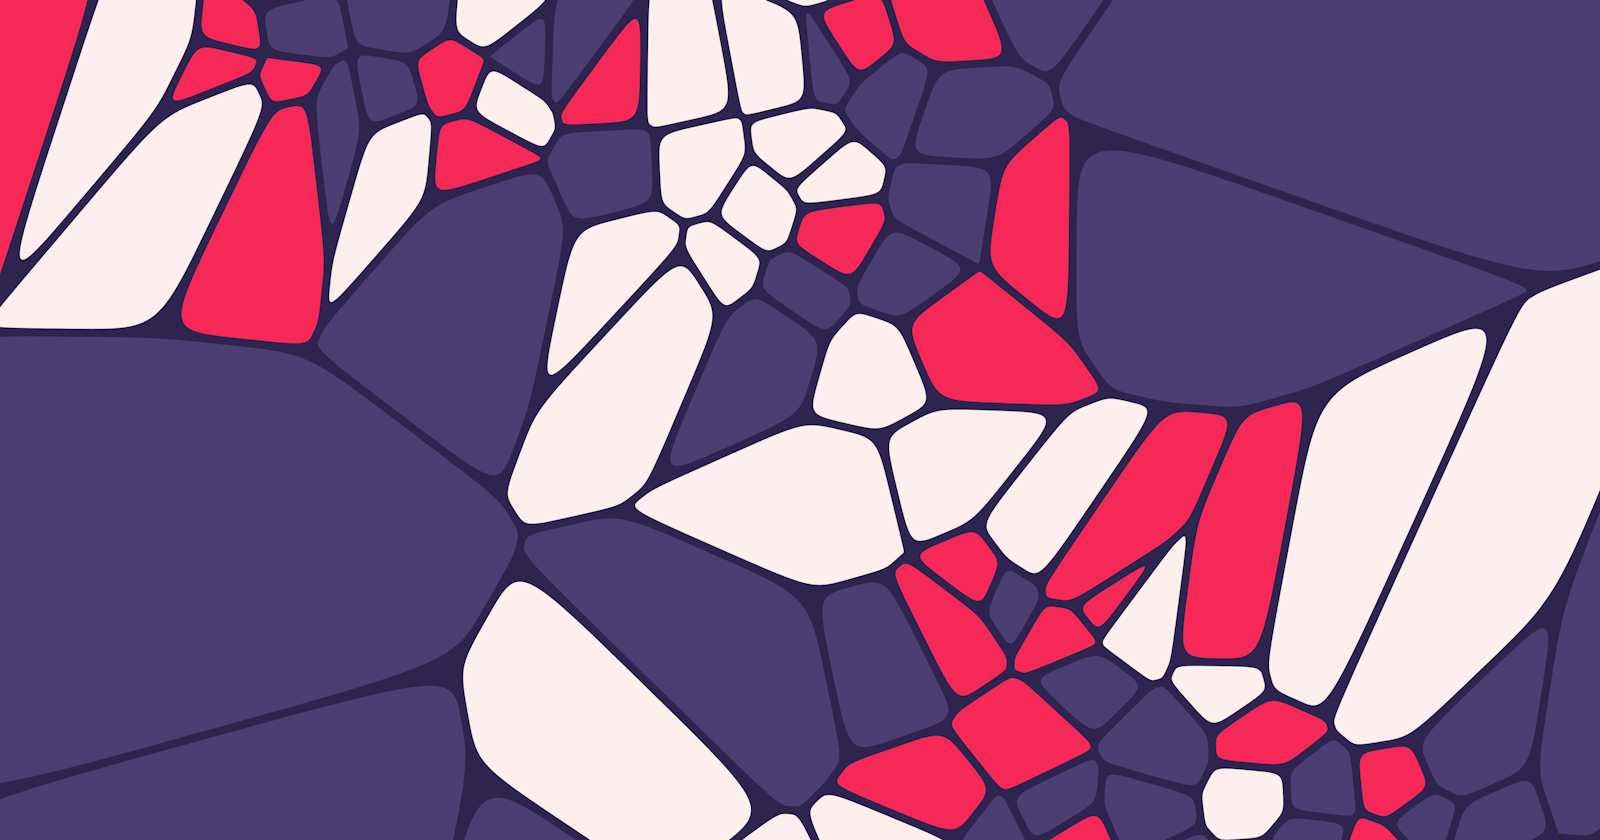 Voronoi Diagrams in a 2D and 3D Space